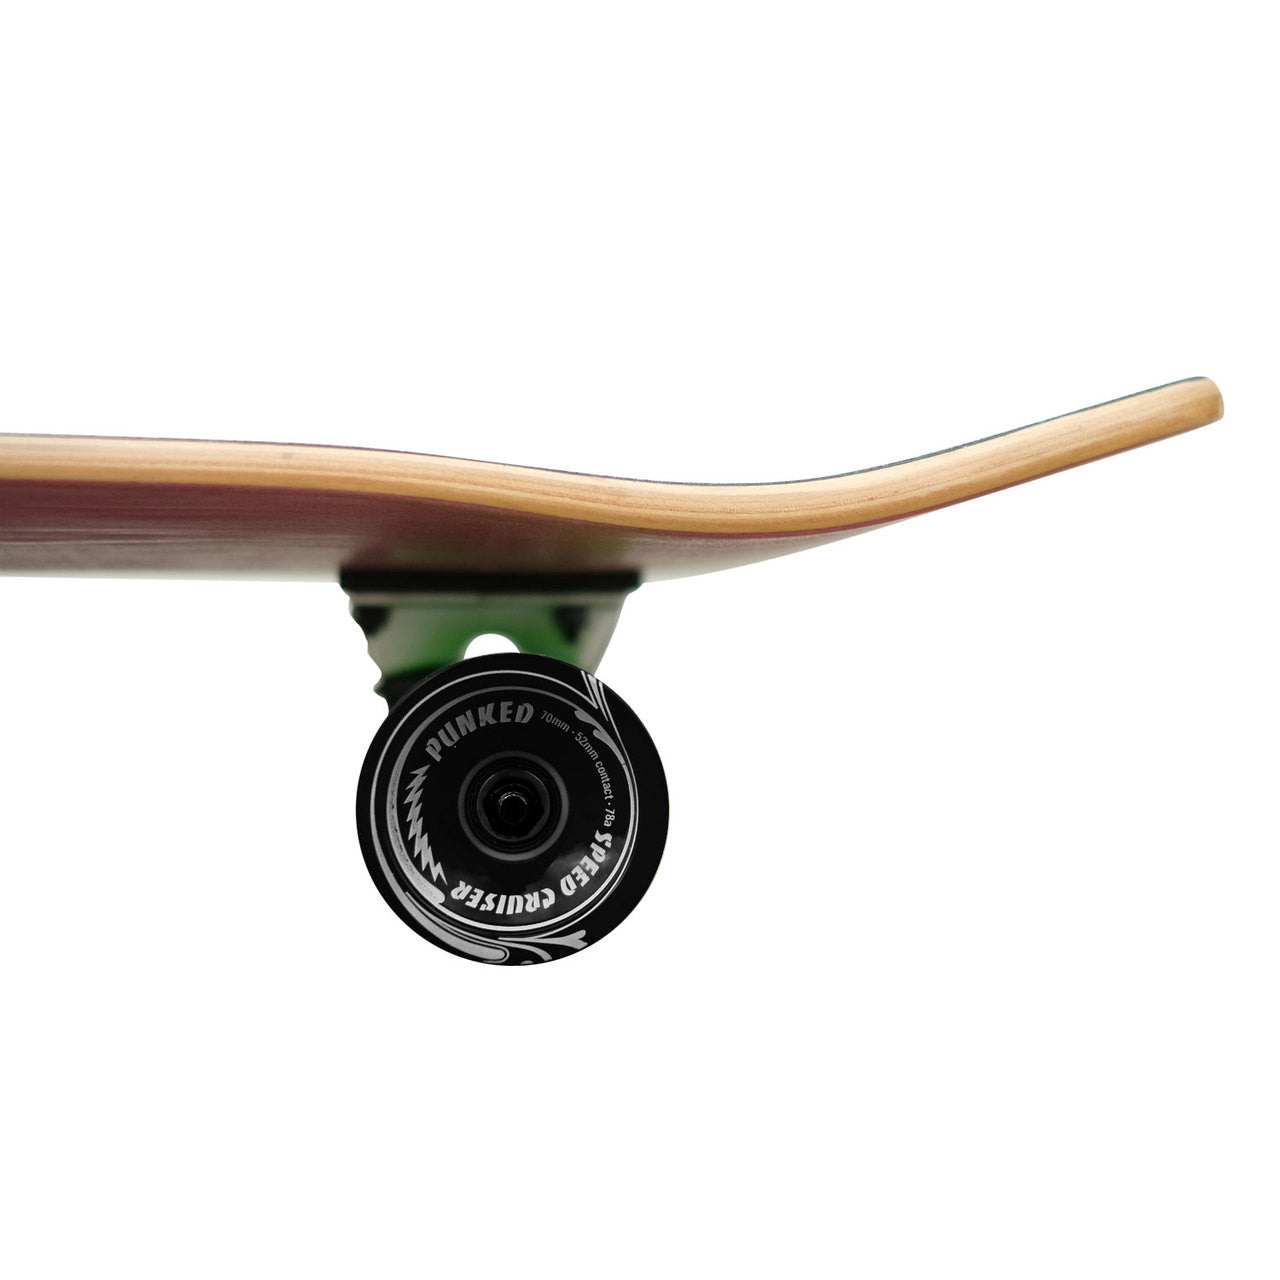 Yocaher Old School Longboard Complete - Checker Yellow